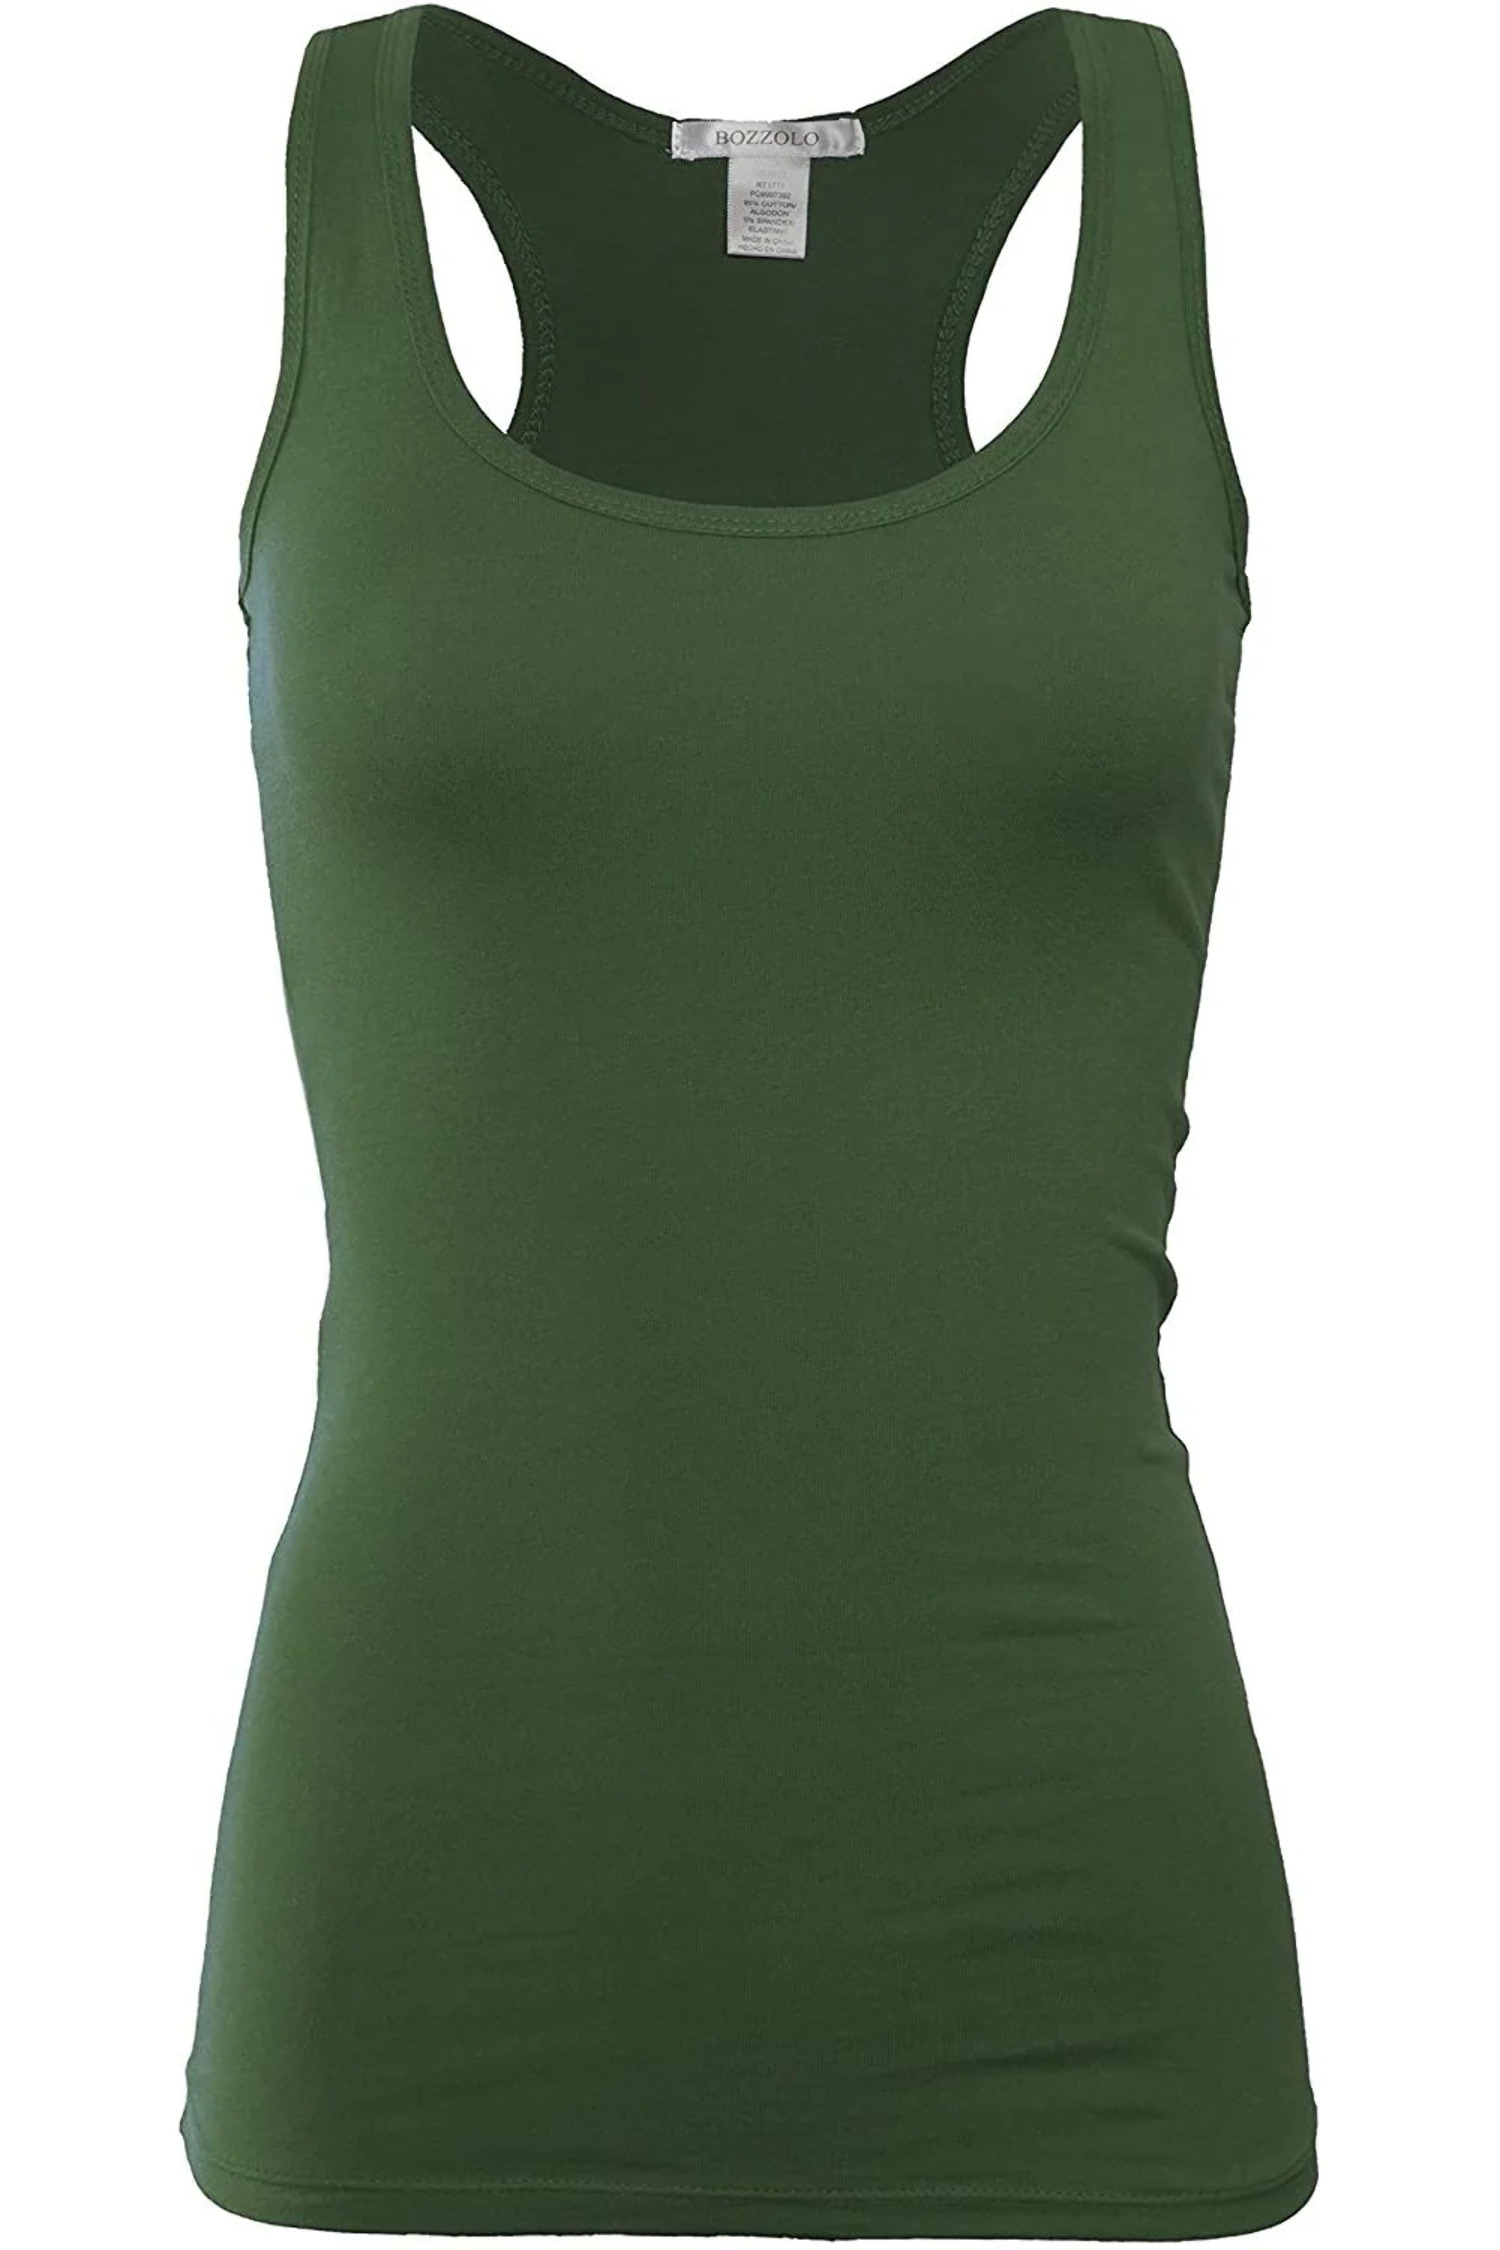 Bozzolo Women's Basic Cotton Spandex Racerback Solid Plain Fitted Tank Top -RT1777 - image 5 of 11